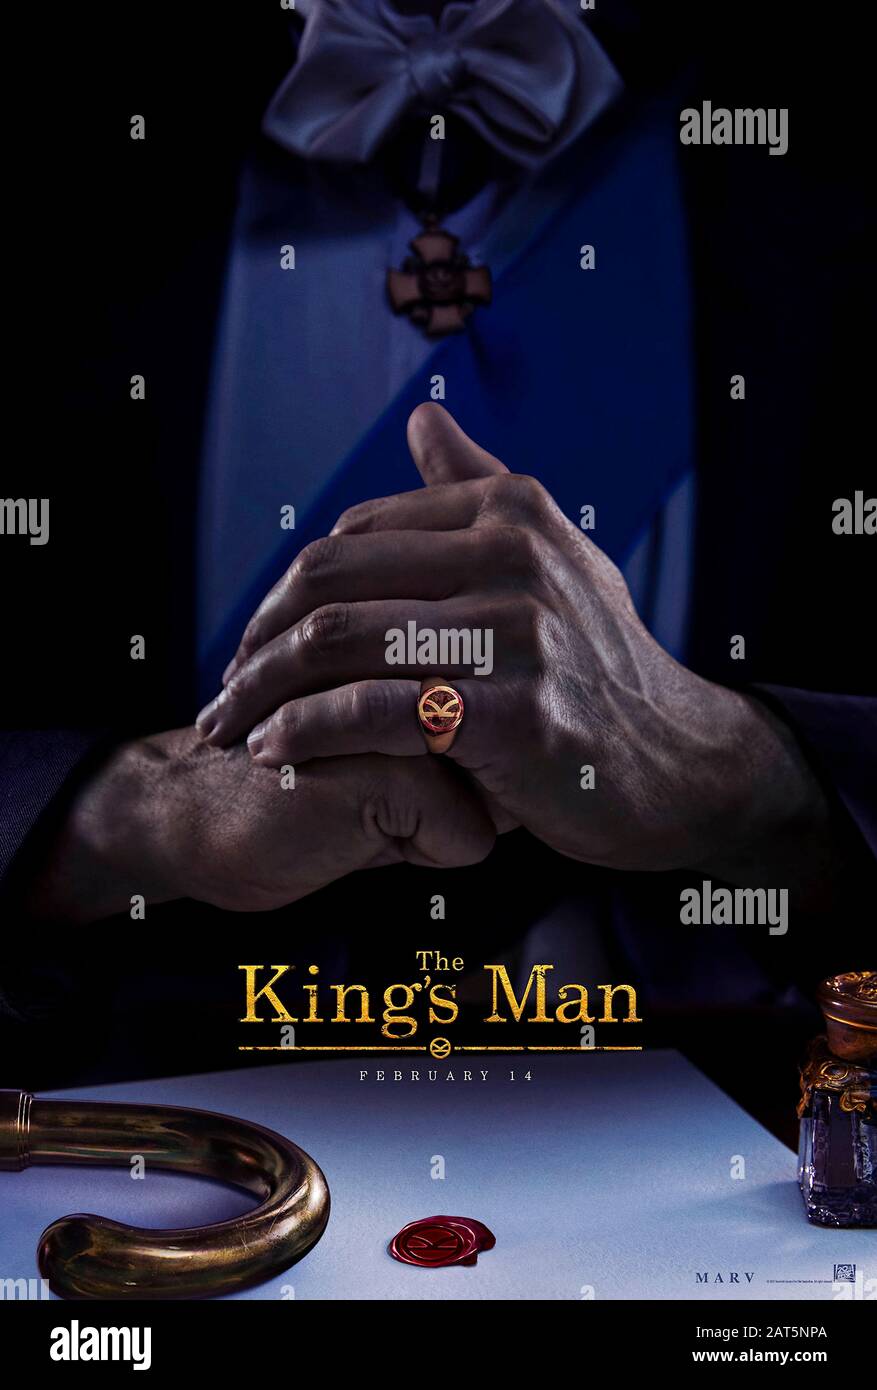 The King's Man (2020) directed by Matthew Vaughn and starring Gemma Arterton, Matthew Goode, Aaron Taylor-Johnson, Djimon Hounsou and Charles Dance. Prequel to the Kingsman films in which an assembly of history’s worst villains and criminal masterminds much be stopped before they kill millions. Stock Photo